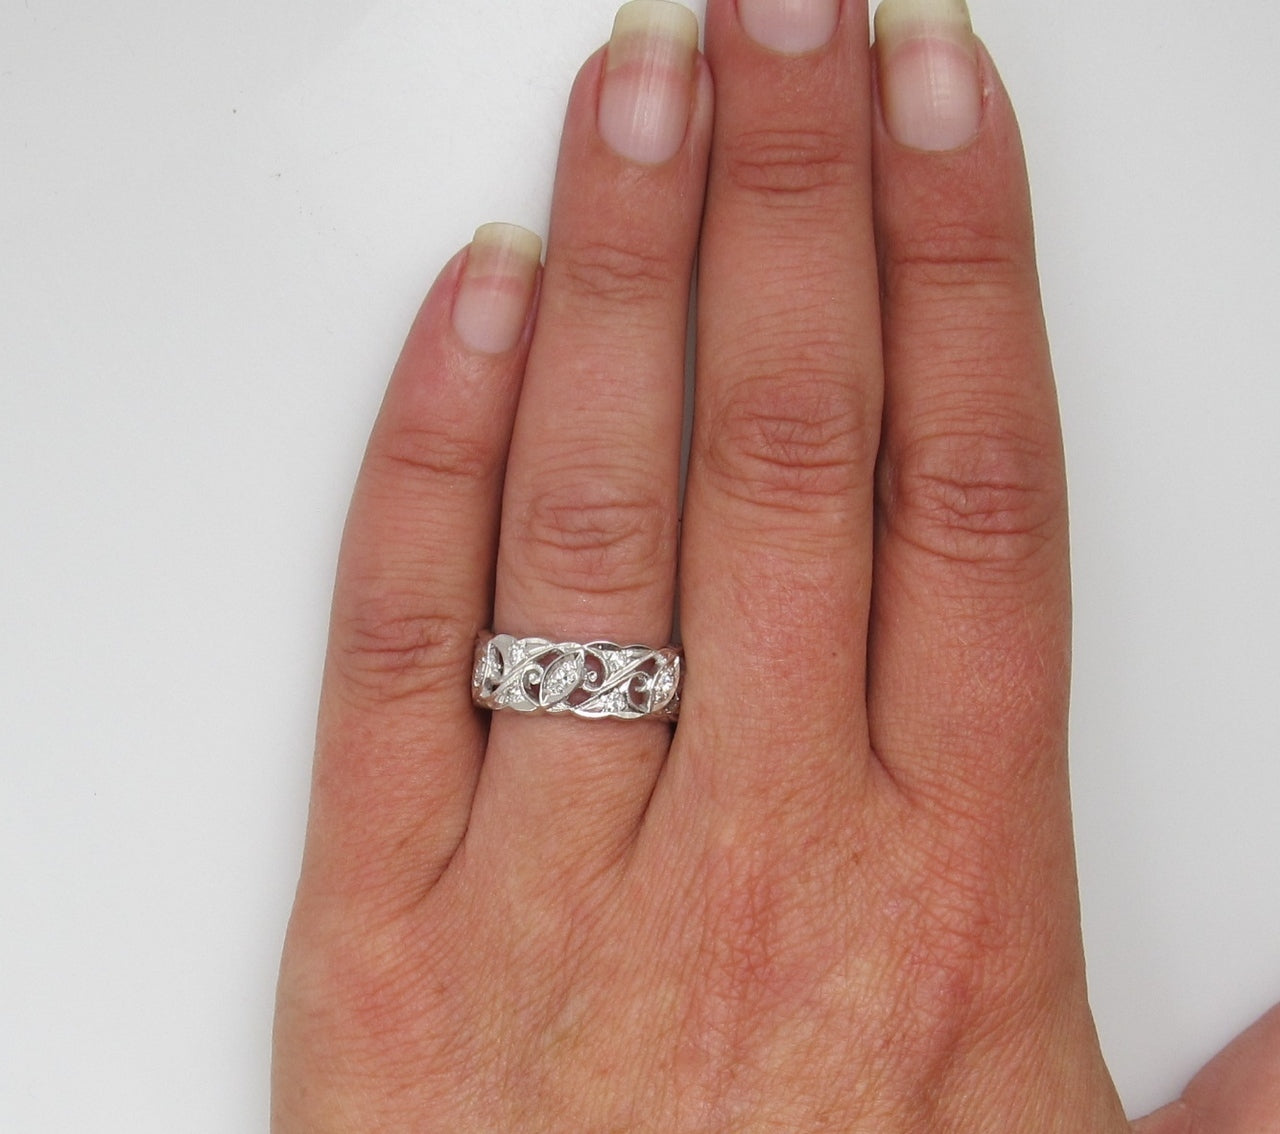 14k White Gold Eternity Band With .30cts In Diamonds, Circa 1920